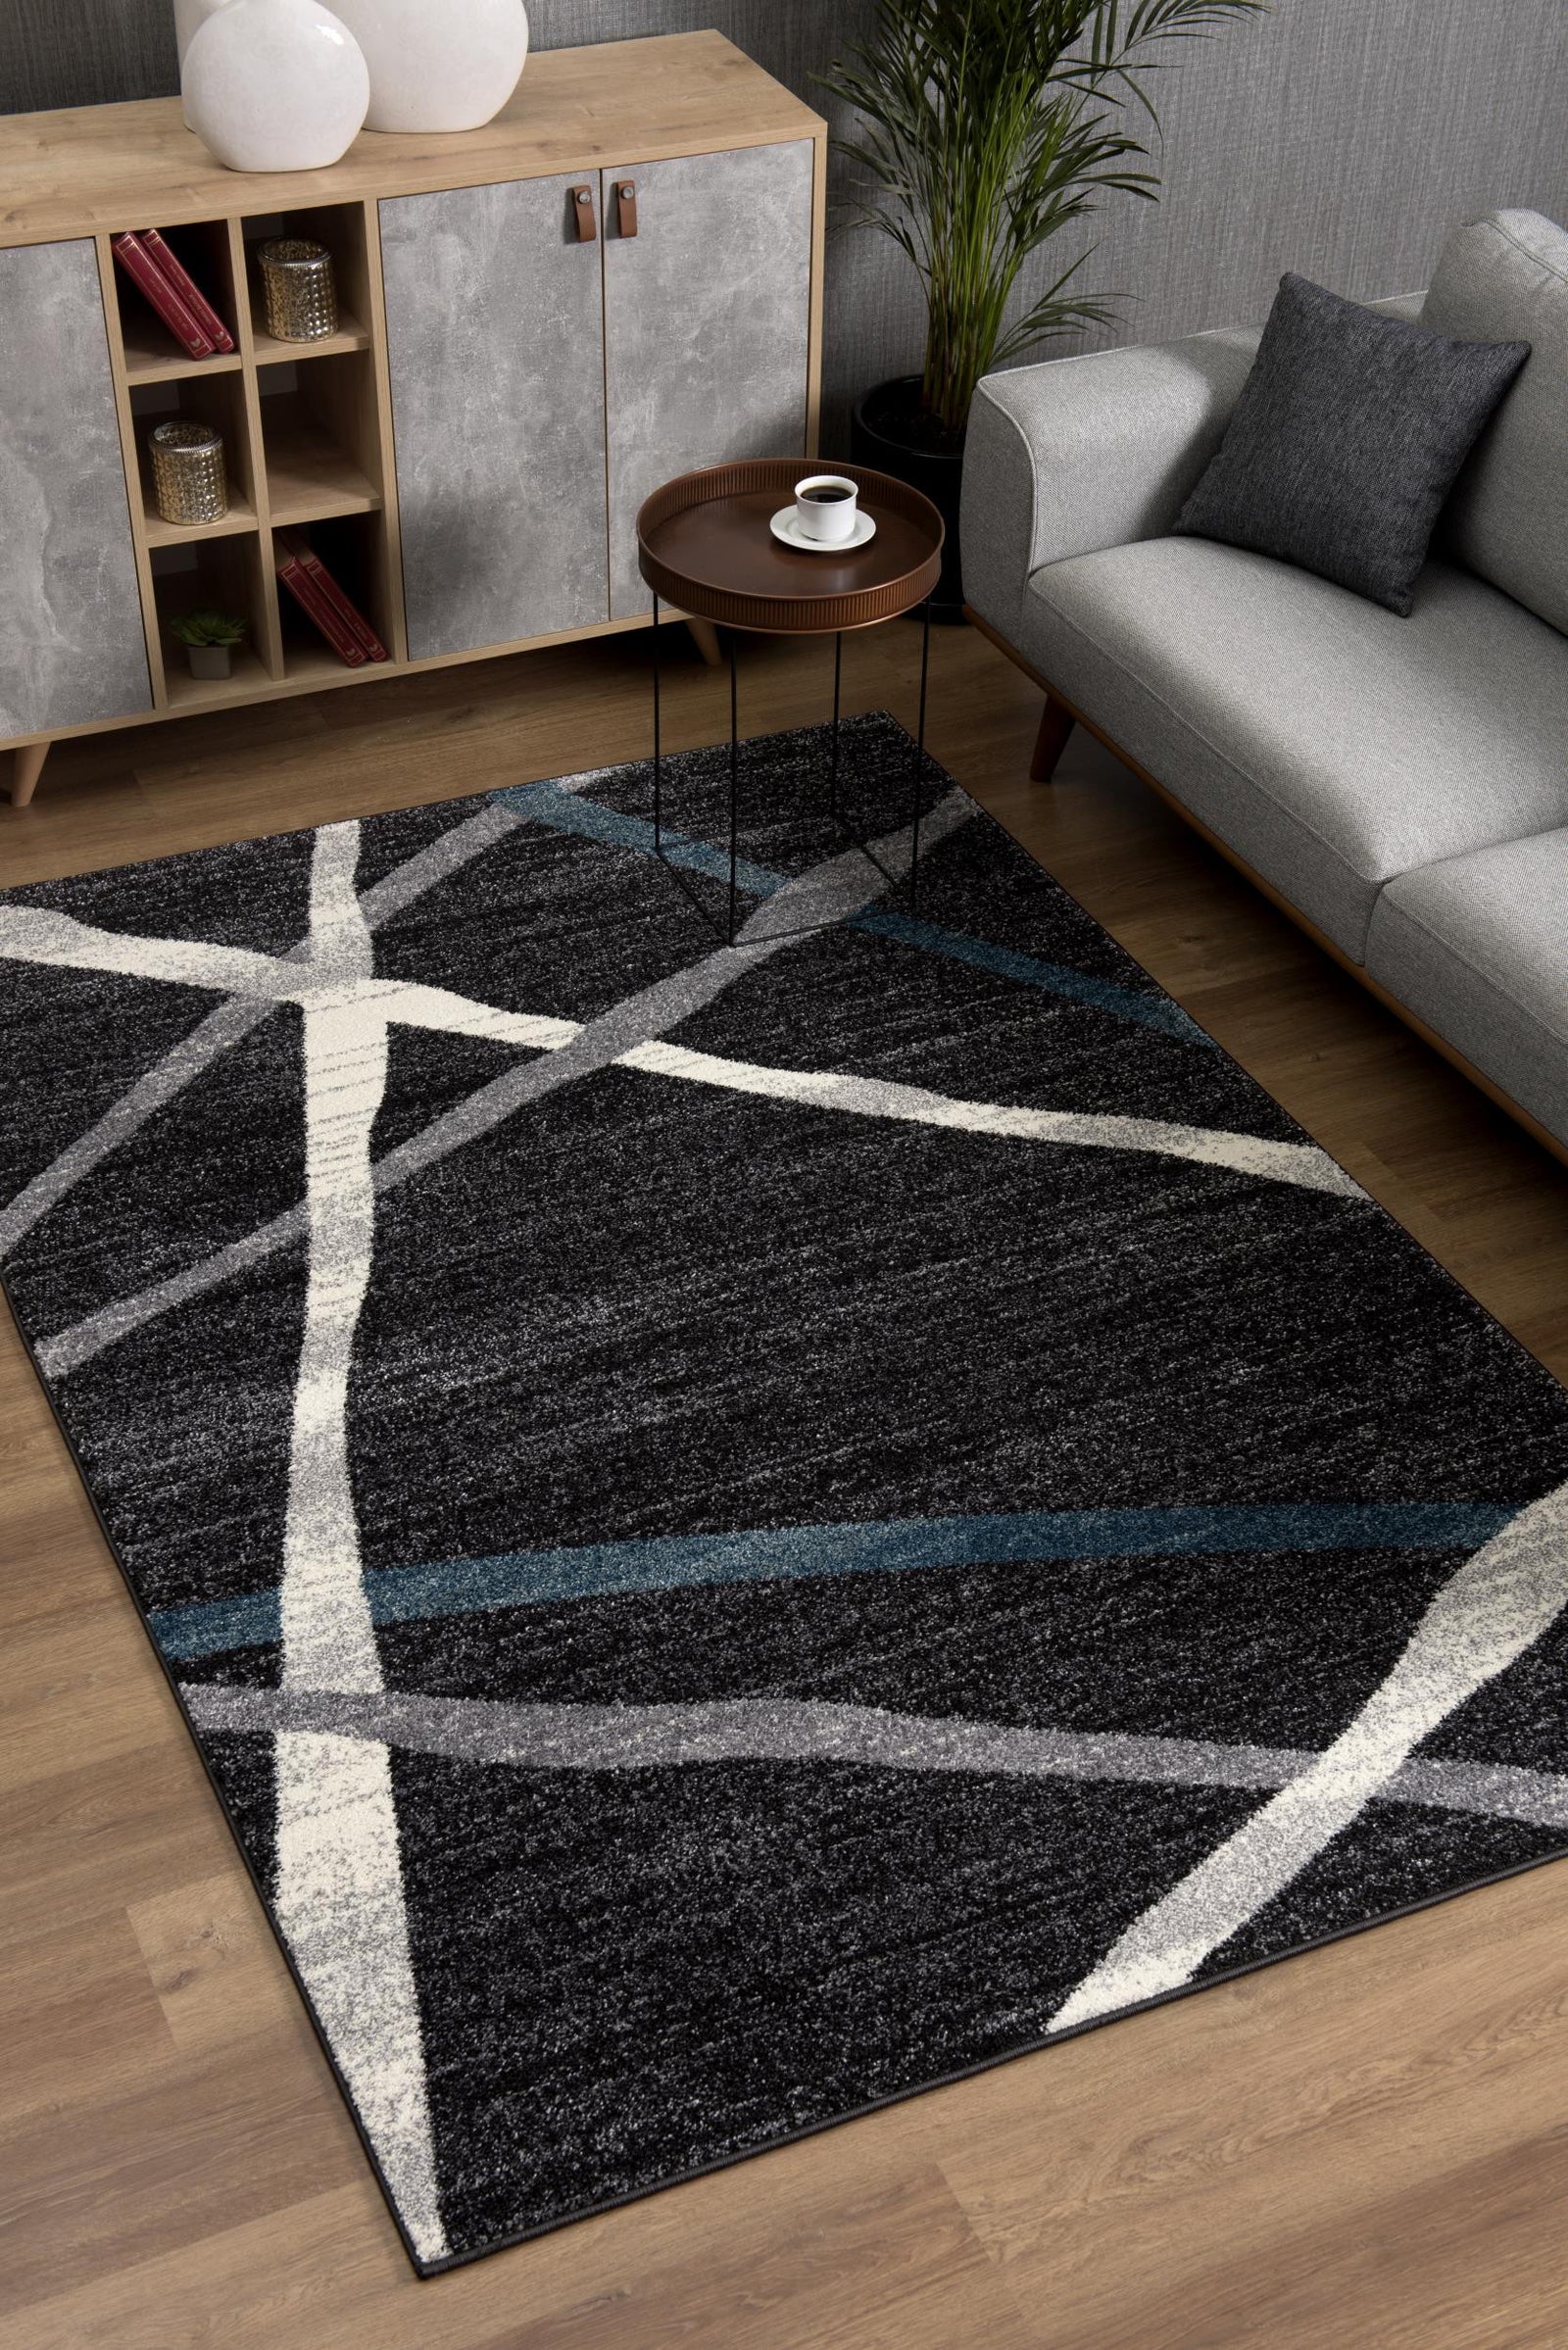 4’ X 6’ Distressed Black And Gray Abstract Area Rug